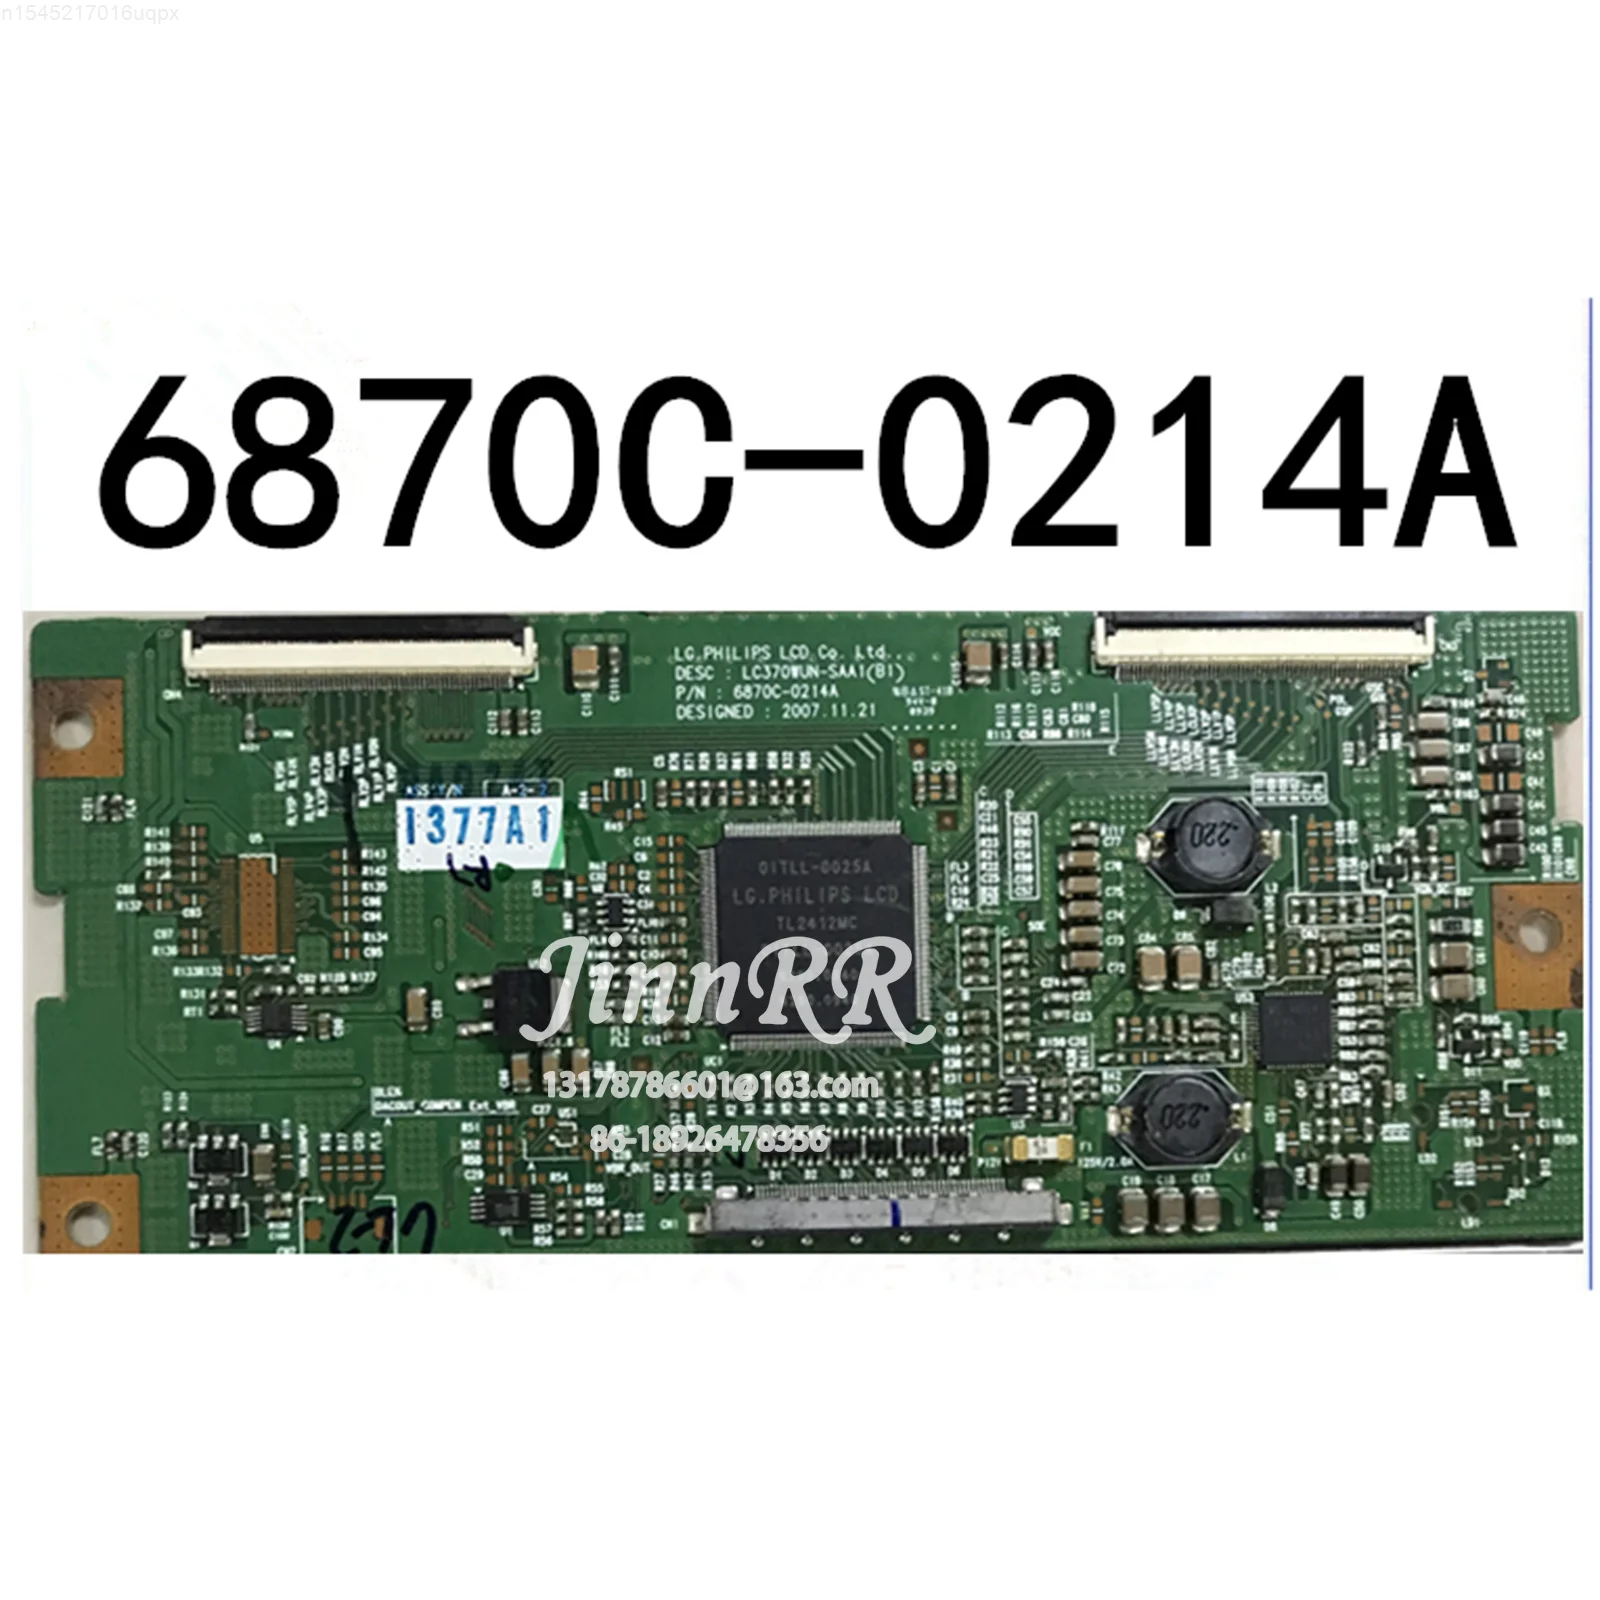 

37L01HM LG LC370WUN-SAA1(B1) NEW original constant current plate for 6870C-0214A Logic board Strict test quality assurance